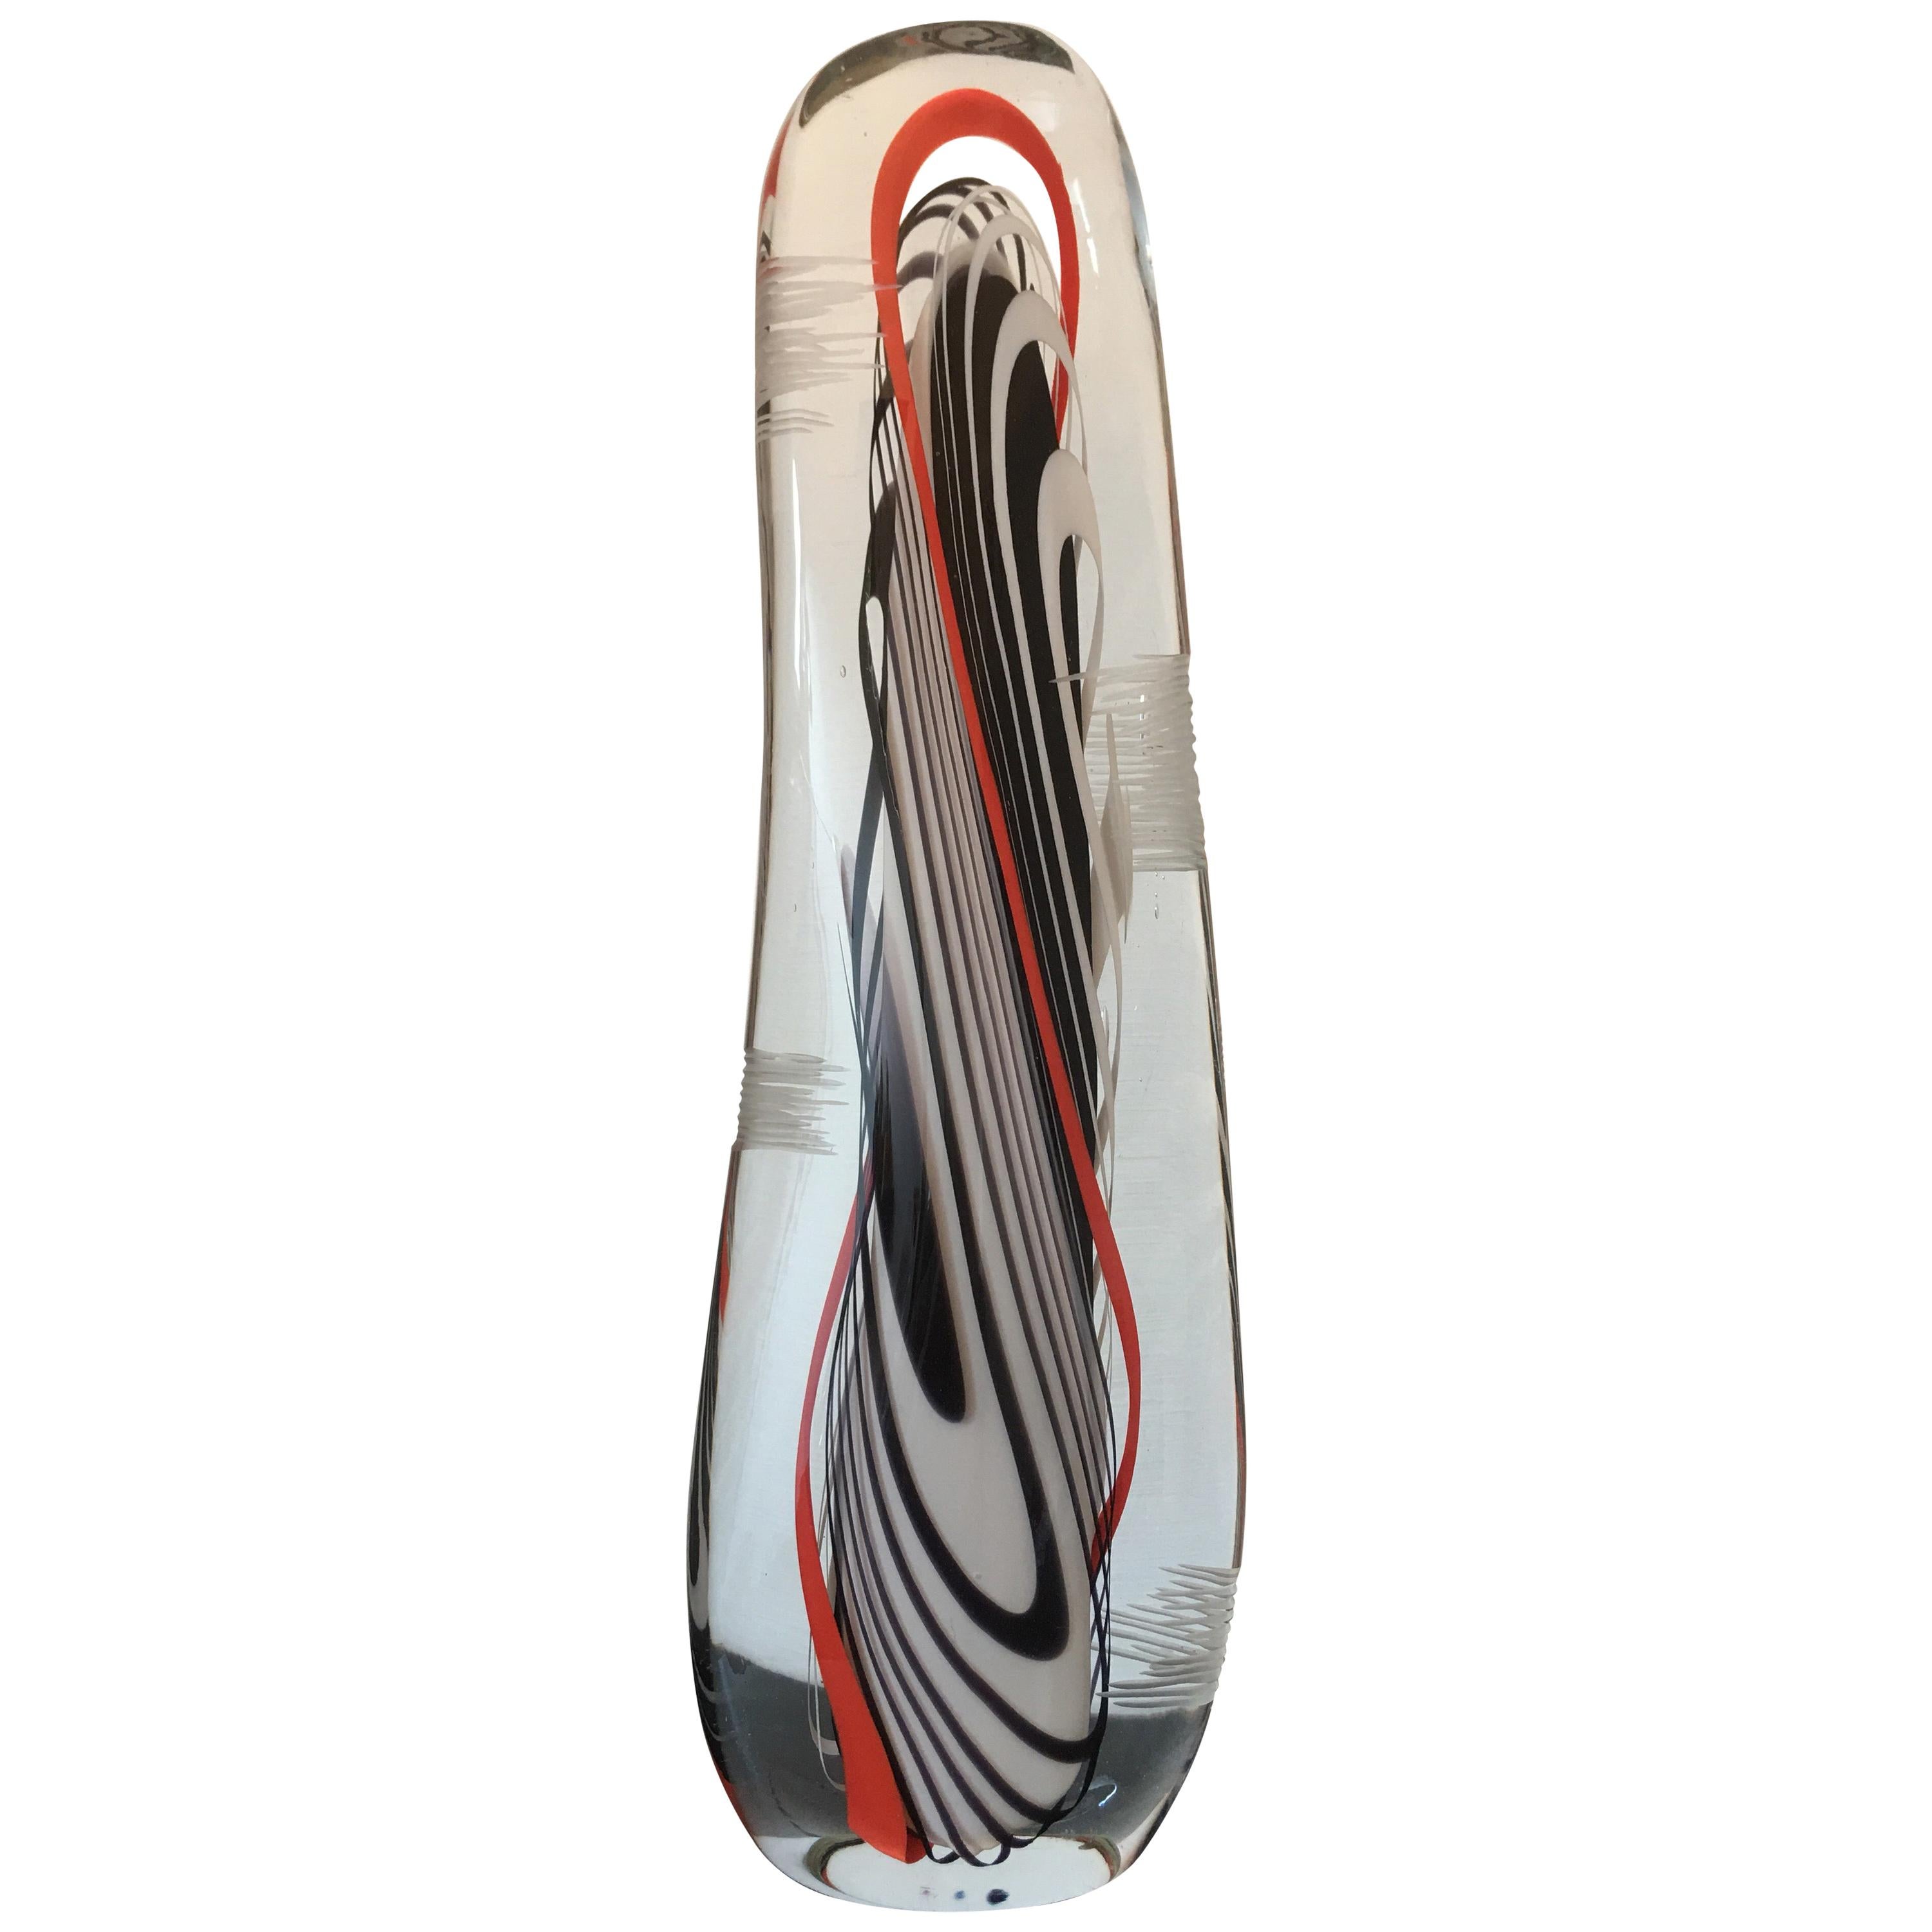 Flavio Poli Signed Large Art Glass Sculpture, Abstract Form, Italy 1979 For Sale